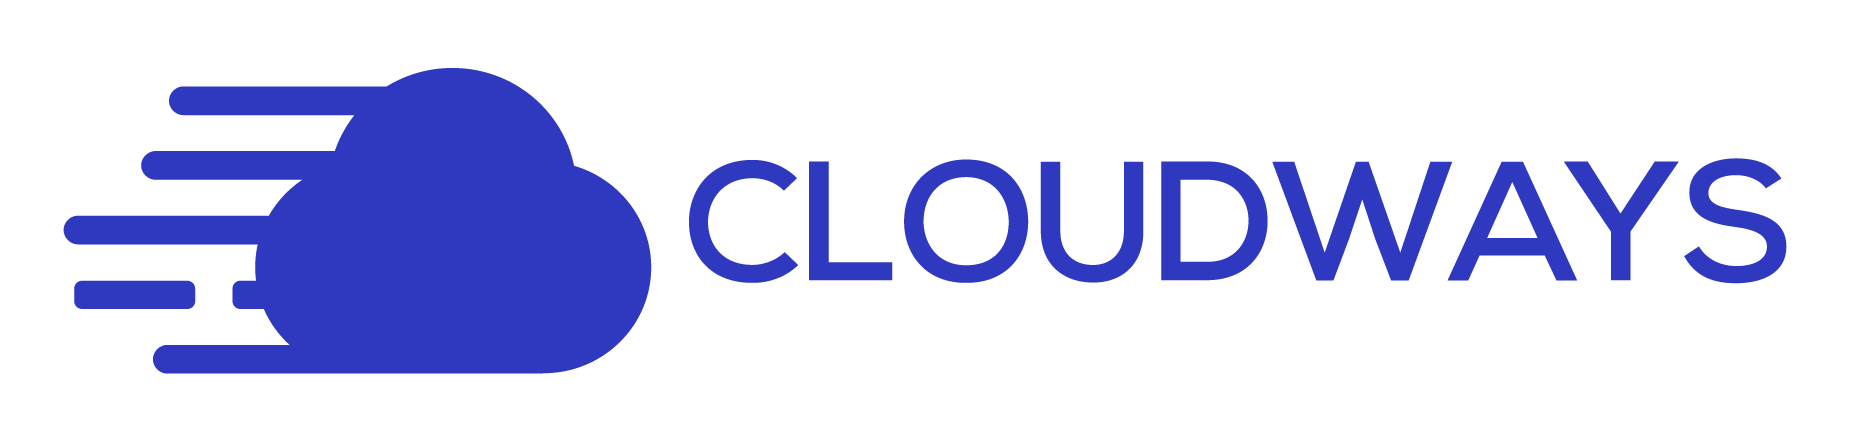 The cloudways official logo